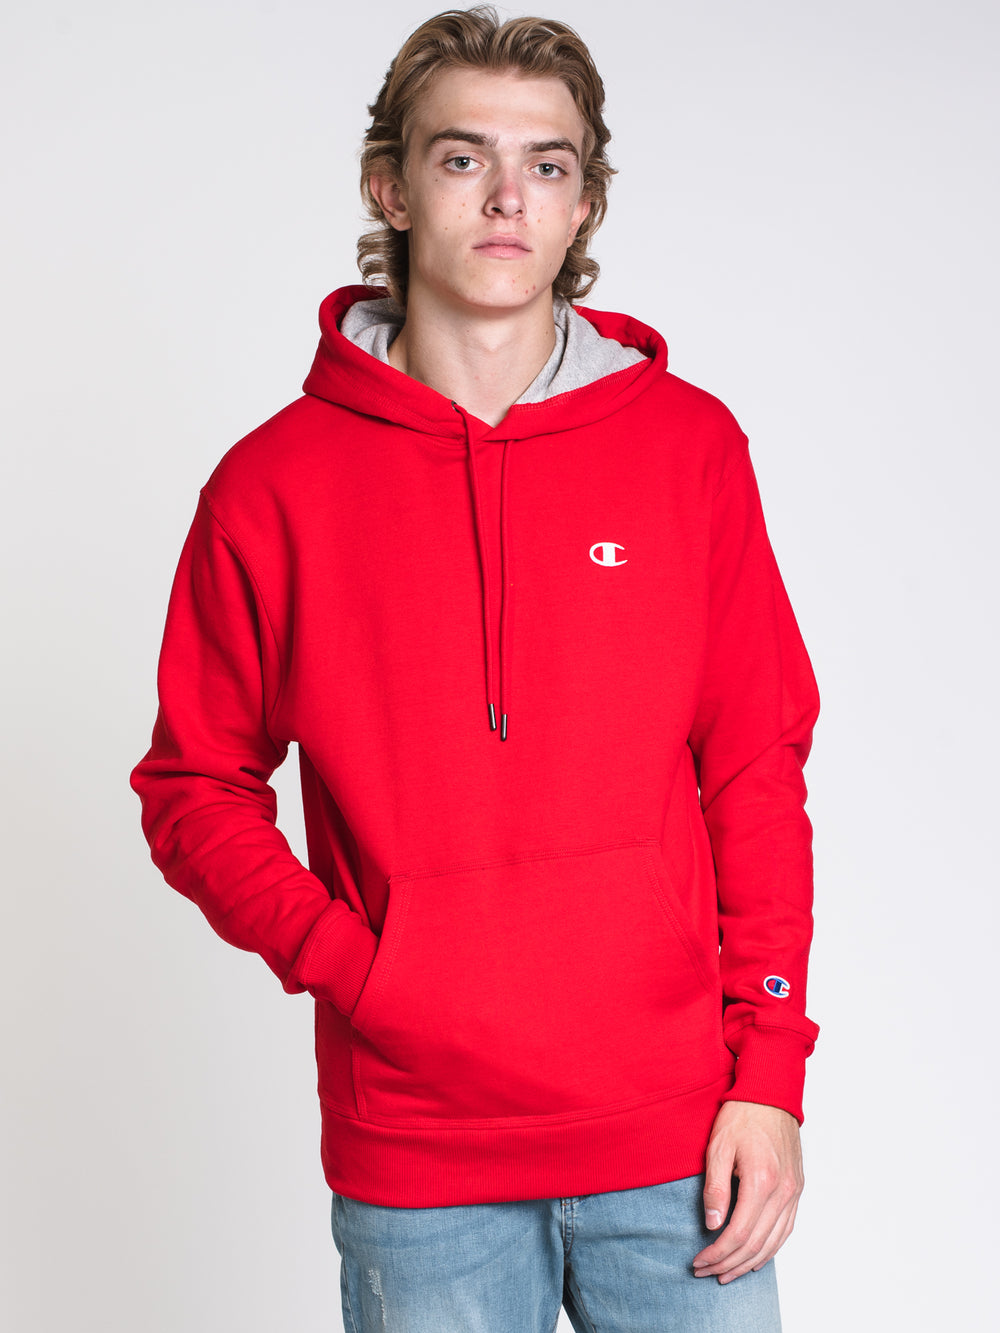 MENS COLOUR POP PULLOVER HOODIE - RED/WHITE - CLEARANCE